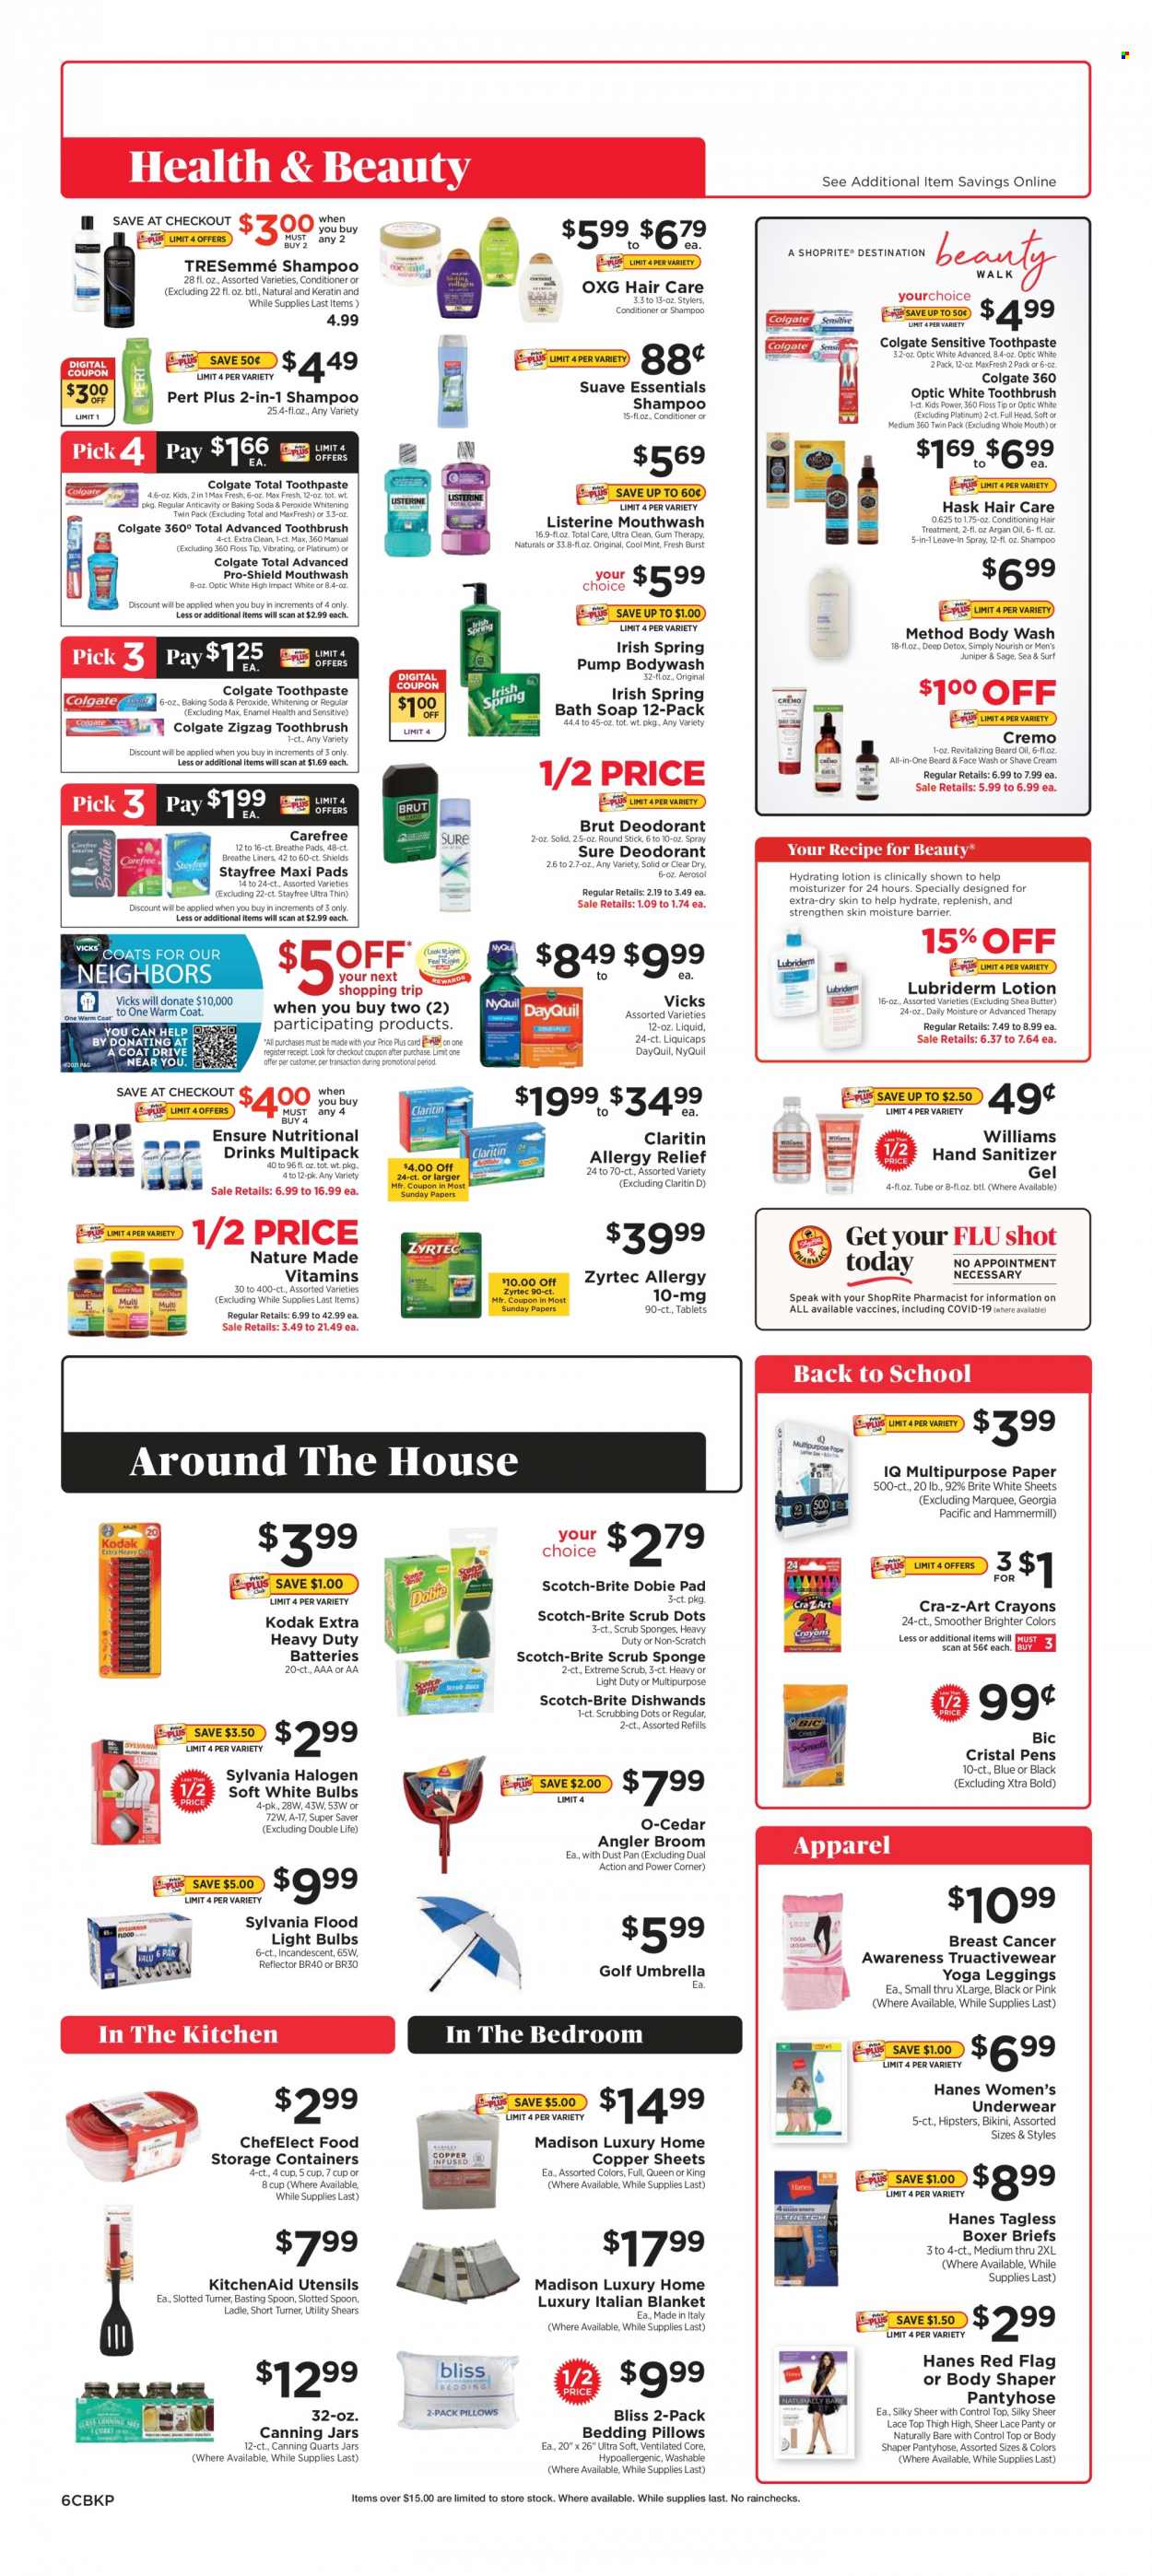 thumbnail - ShopRite Flyer - 09/19/2021 - 09/25/2021 - Sales products - Surf, XTRA, body wash, shampoo, Suave, face gel, soap, Colgate, Listerine, toothbrush, toothpaste, mouthwash, Stayfree, sanitary pads, Carefree, moisturizer, beard oil, conditioner, TRESemmé, keratin, Brite, Hask, body lotion, Lubriderm, shea butter, anti-perspirant, Sure, deodorant, Brut, BIC, shave cream, sponge, broom, angle broom, KitchenAid, spoon, utensils, cup, jar, storage box, paper, battery, bulb, light bulb, Sylvania, blanket, leggings, pantyhose, DayQuil, Nature Made, Zyrtec, NyQuil, argan oil, Vicks, allergy relief, bikini. Page 6.